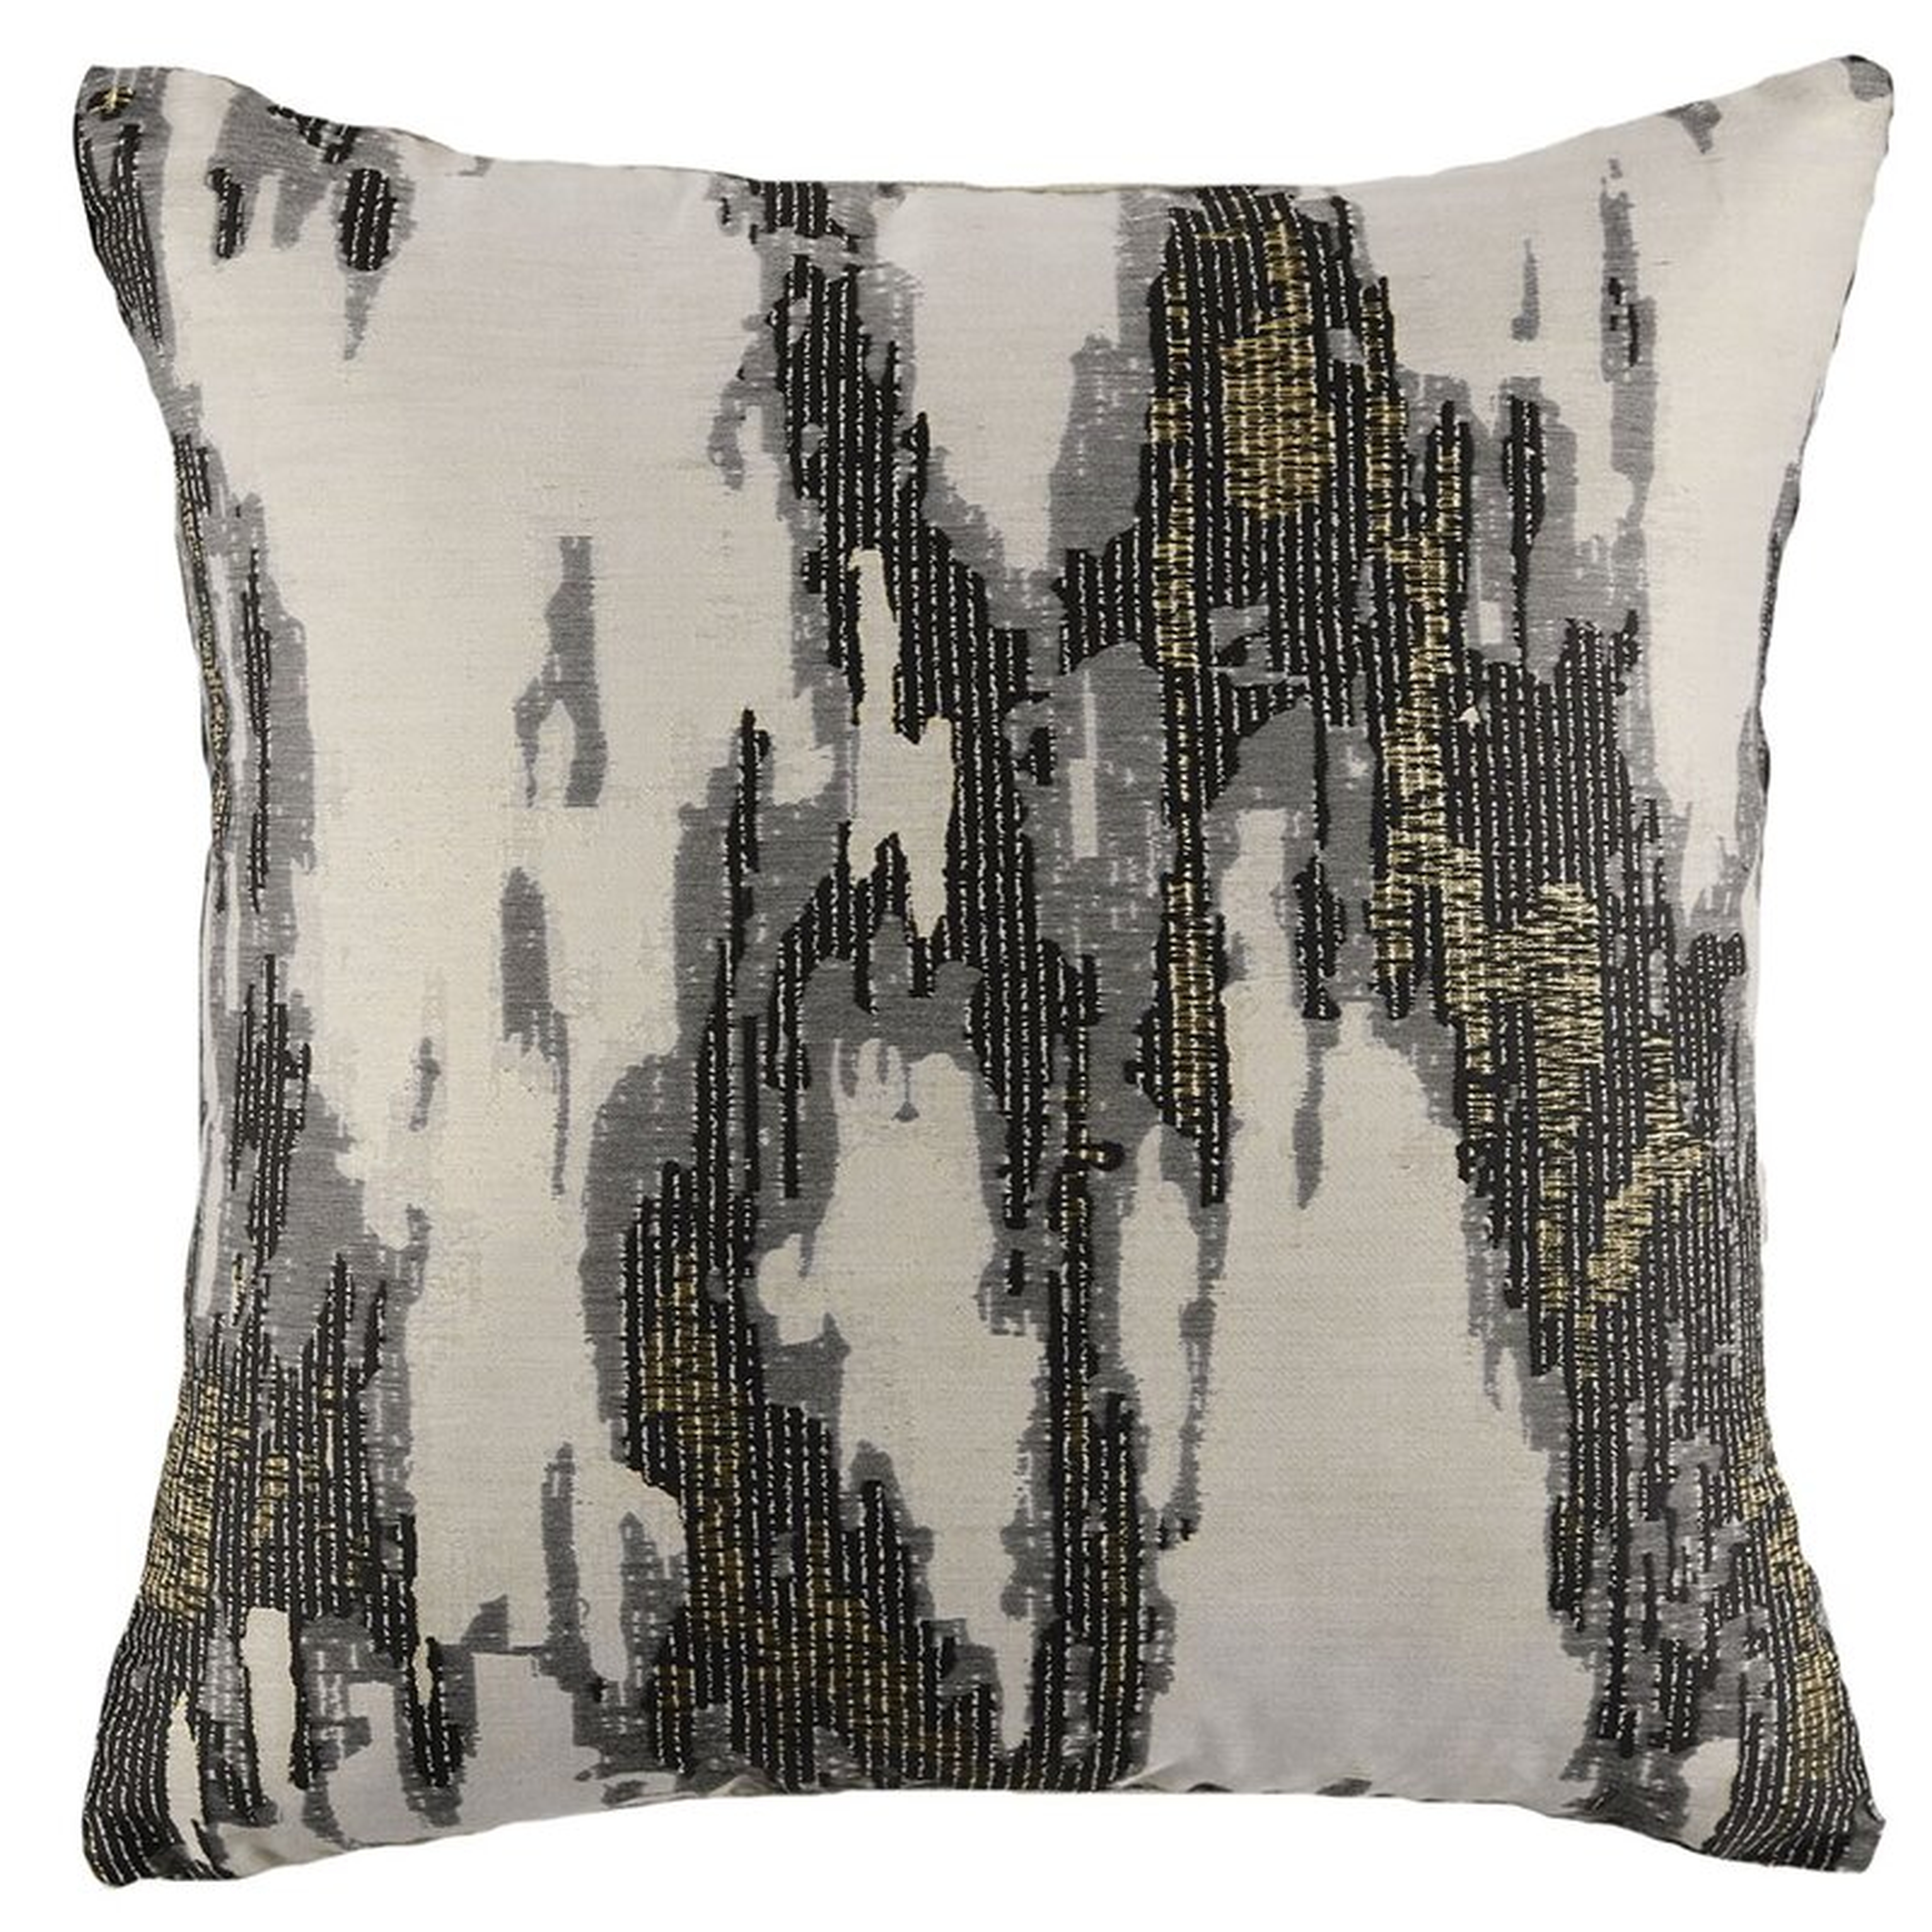 Emdee Square Pillow Cover and Insert - Onyx - Perigold